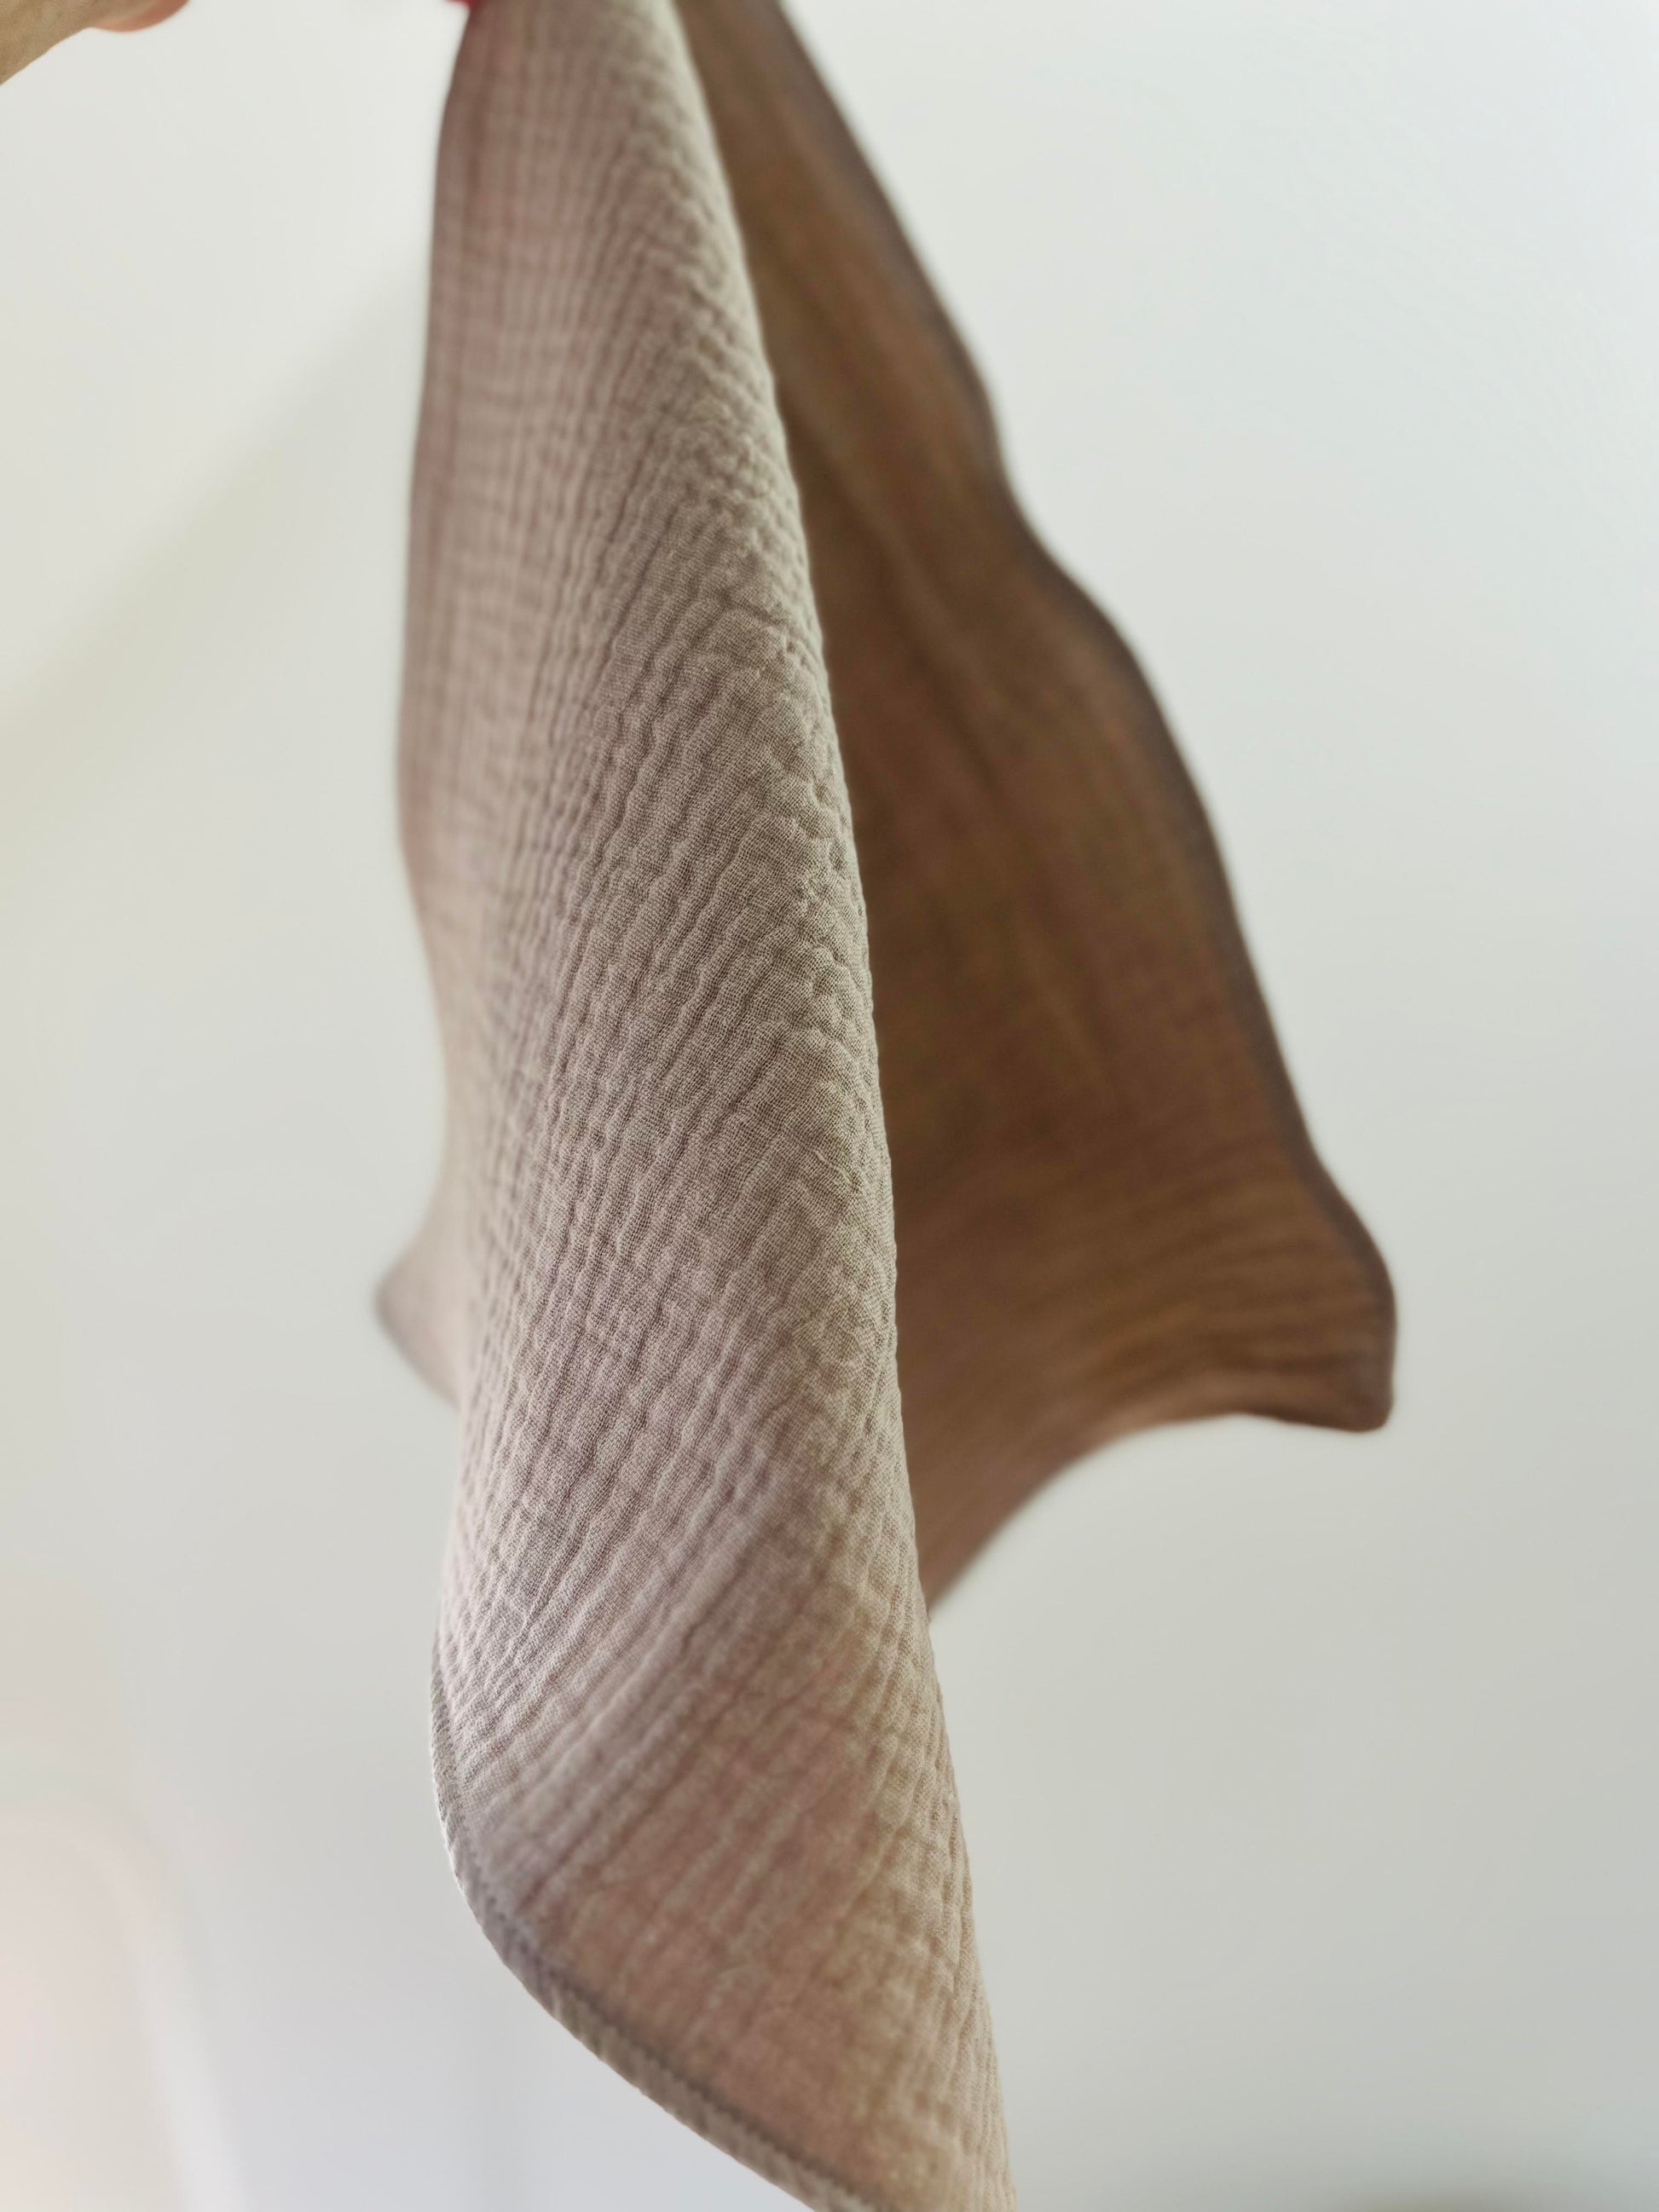 One face cloth hangs from a peg. The background is white.